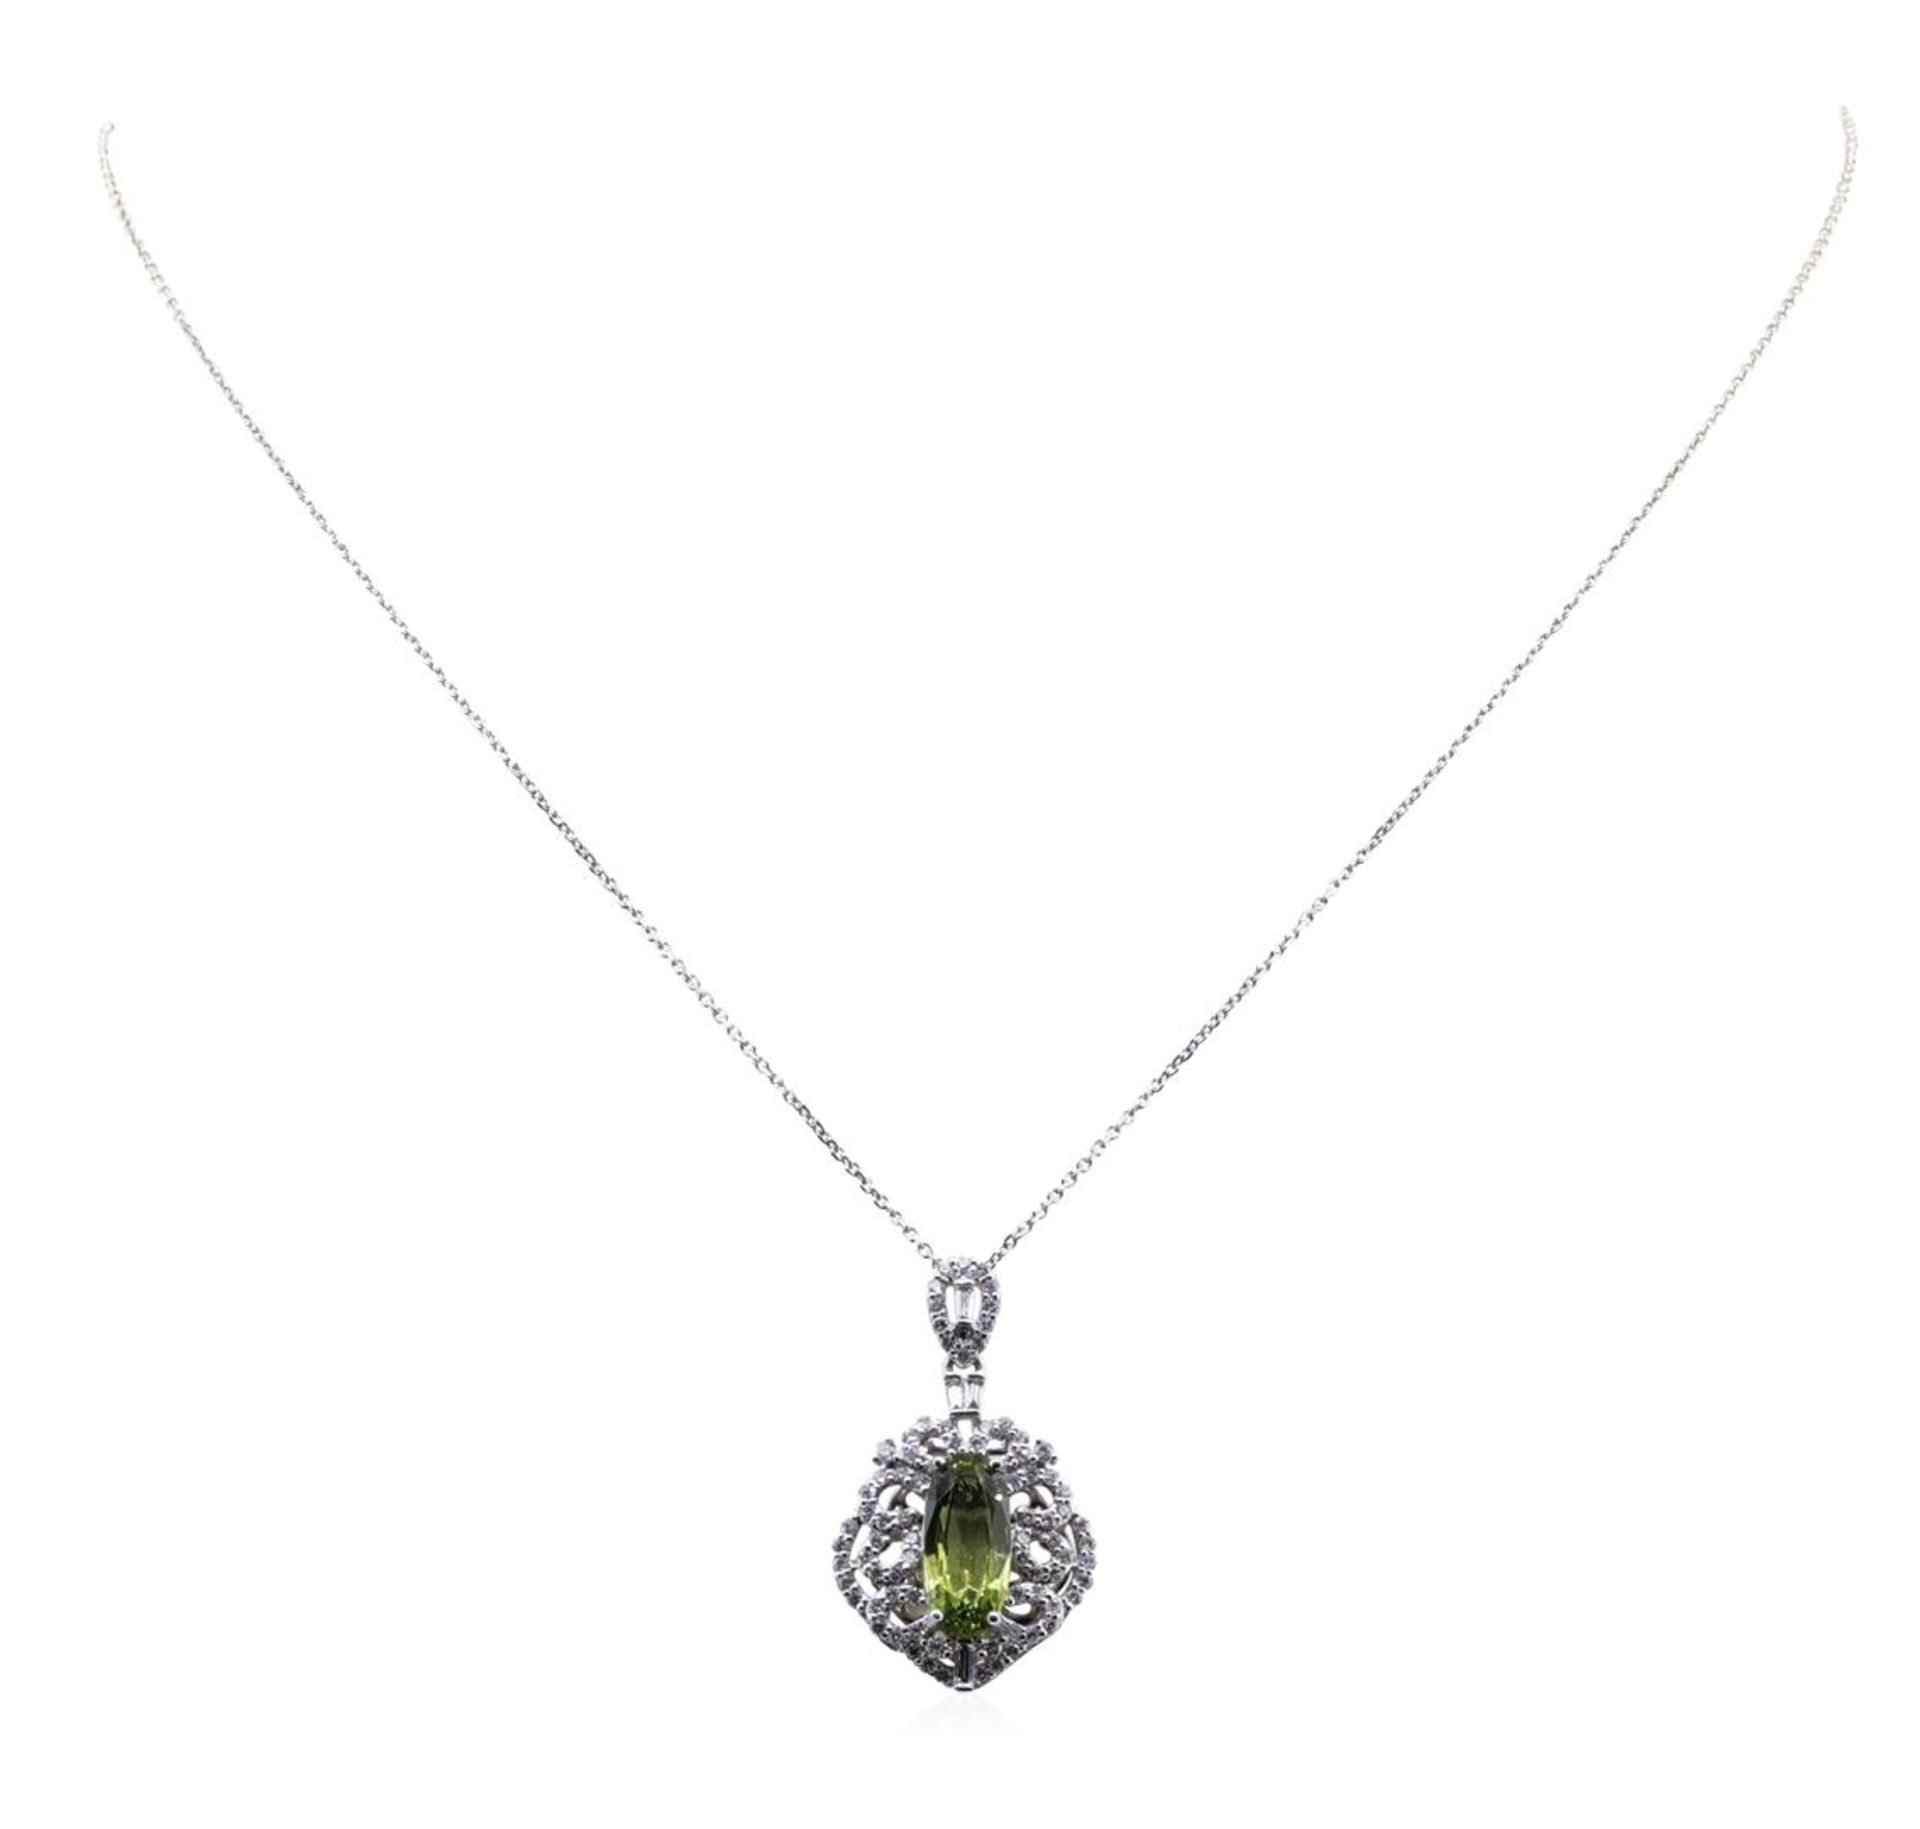 3.19ct Sapphire and Diamond Pendant With Chain - Platinum - Image 2 of 4